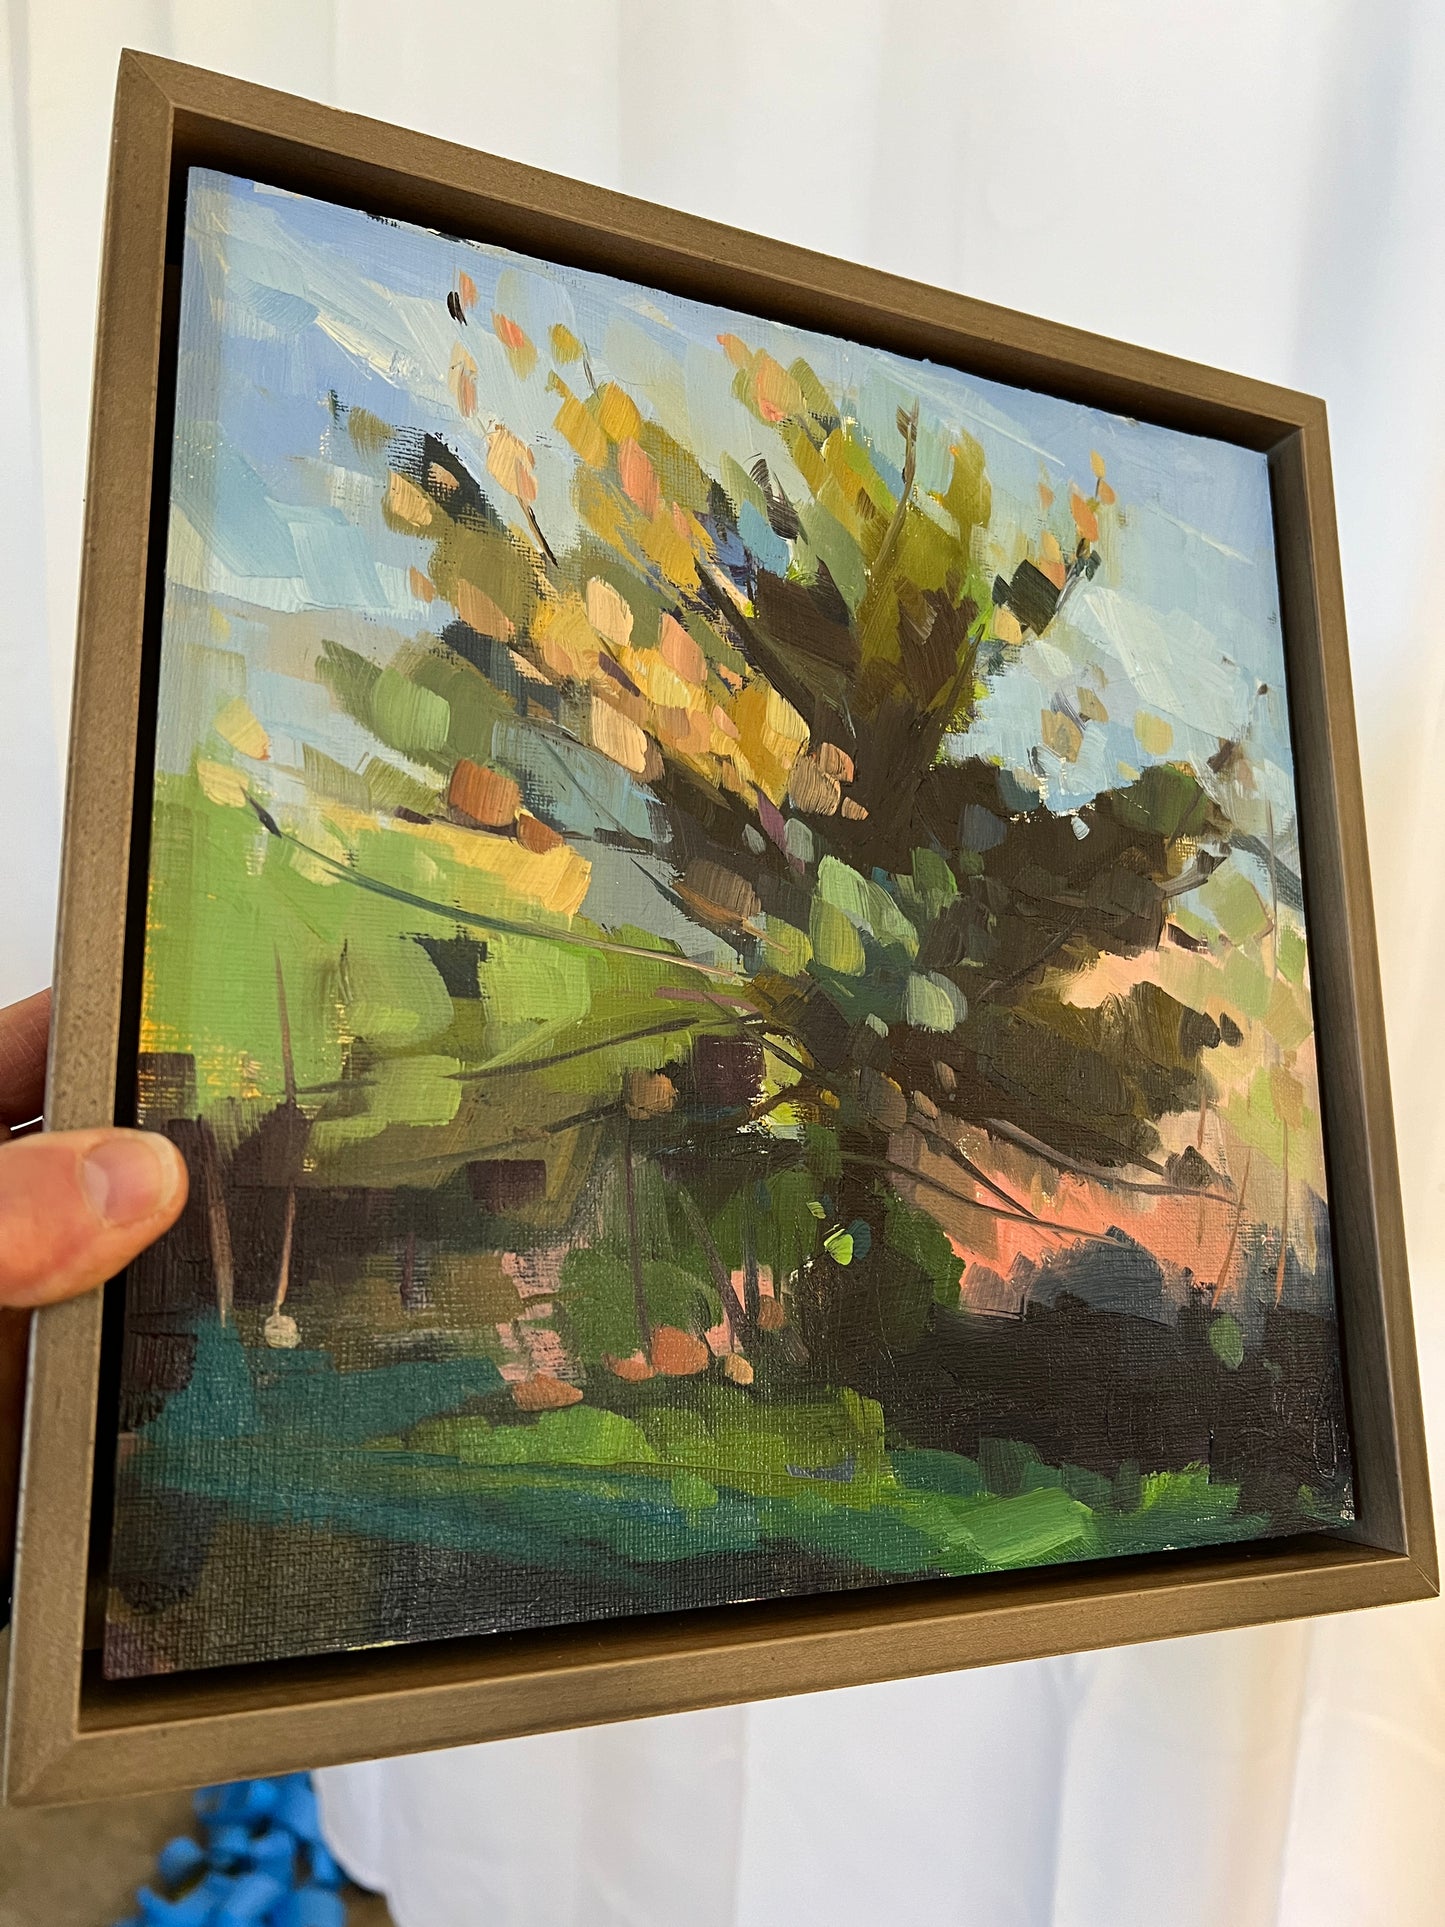 Pine Tree in the Morning, 10" x 10" Original Oil Painting, Framed